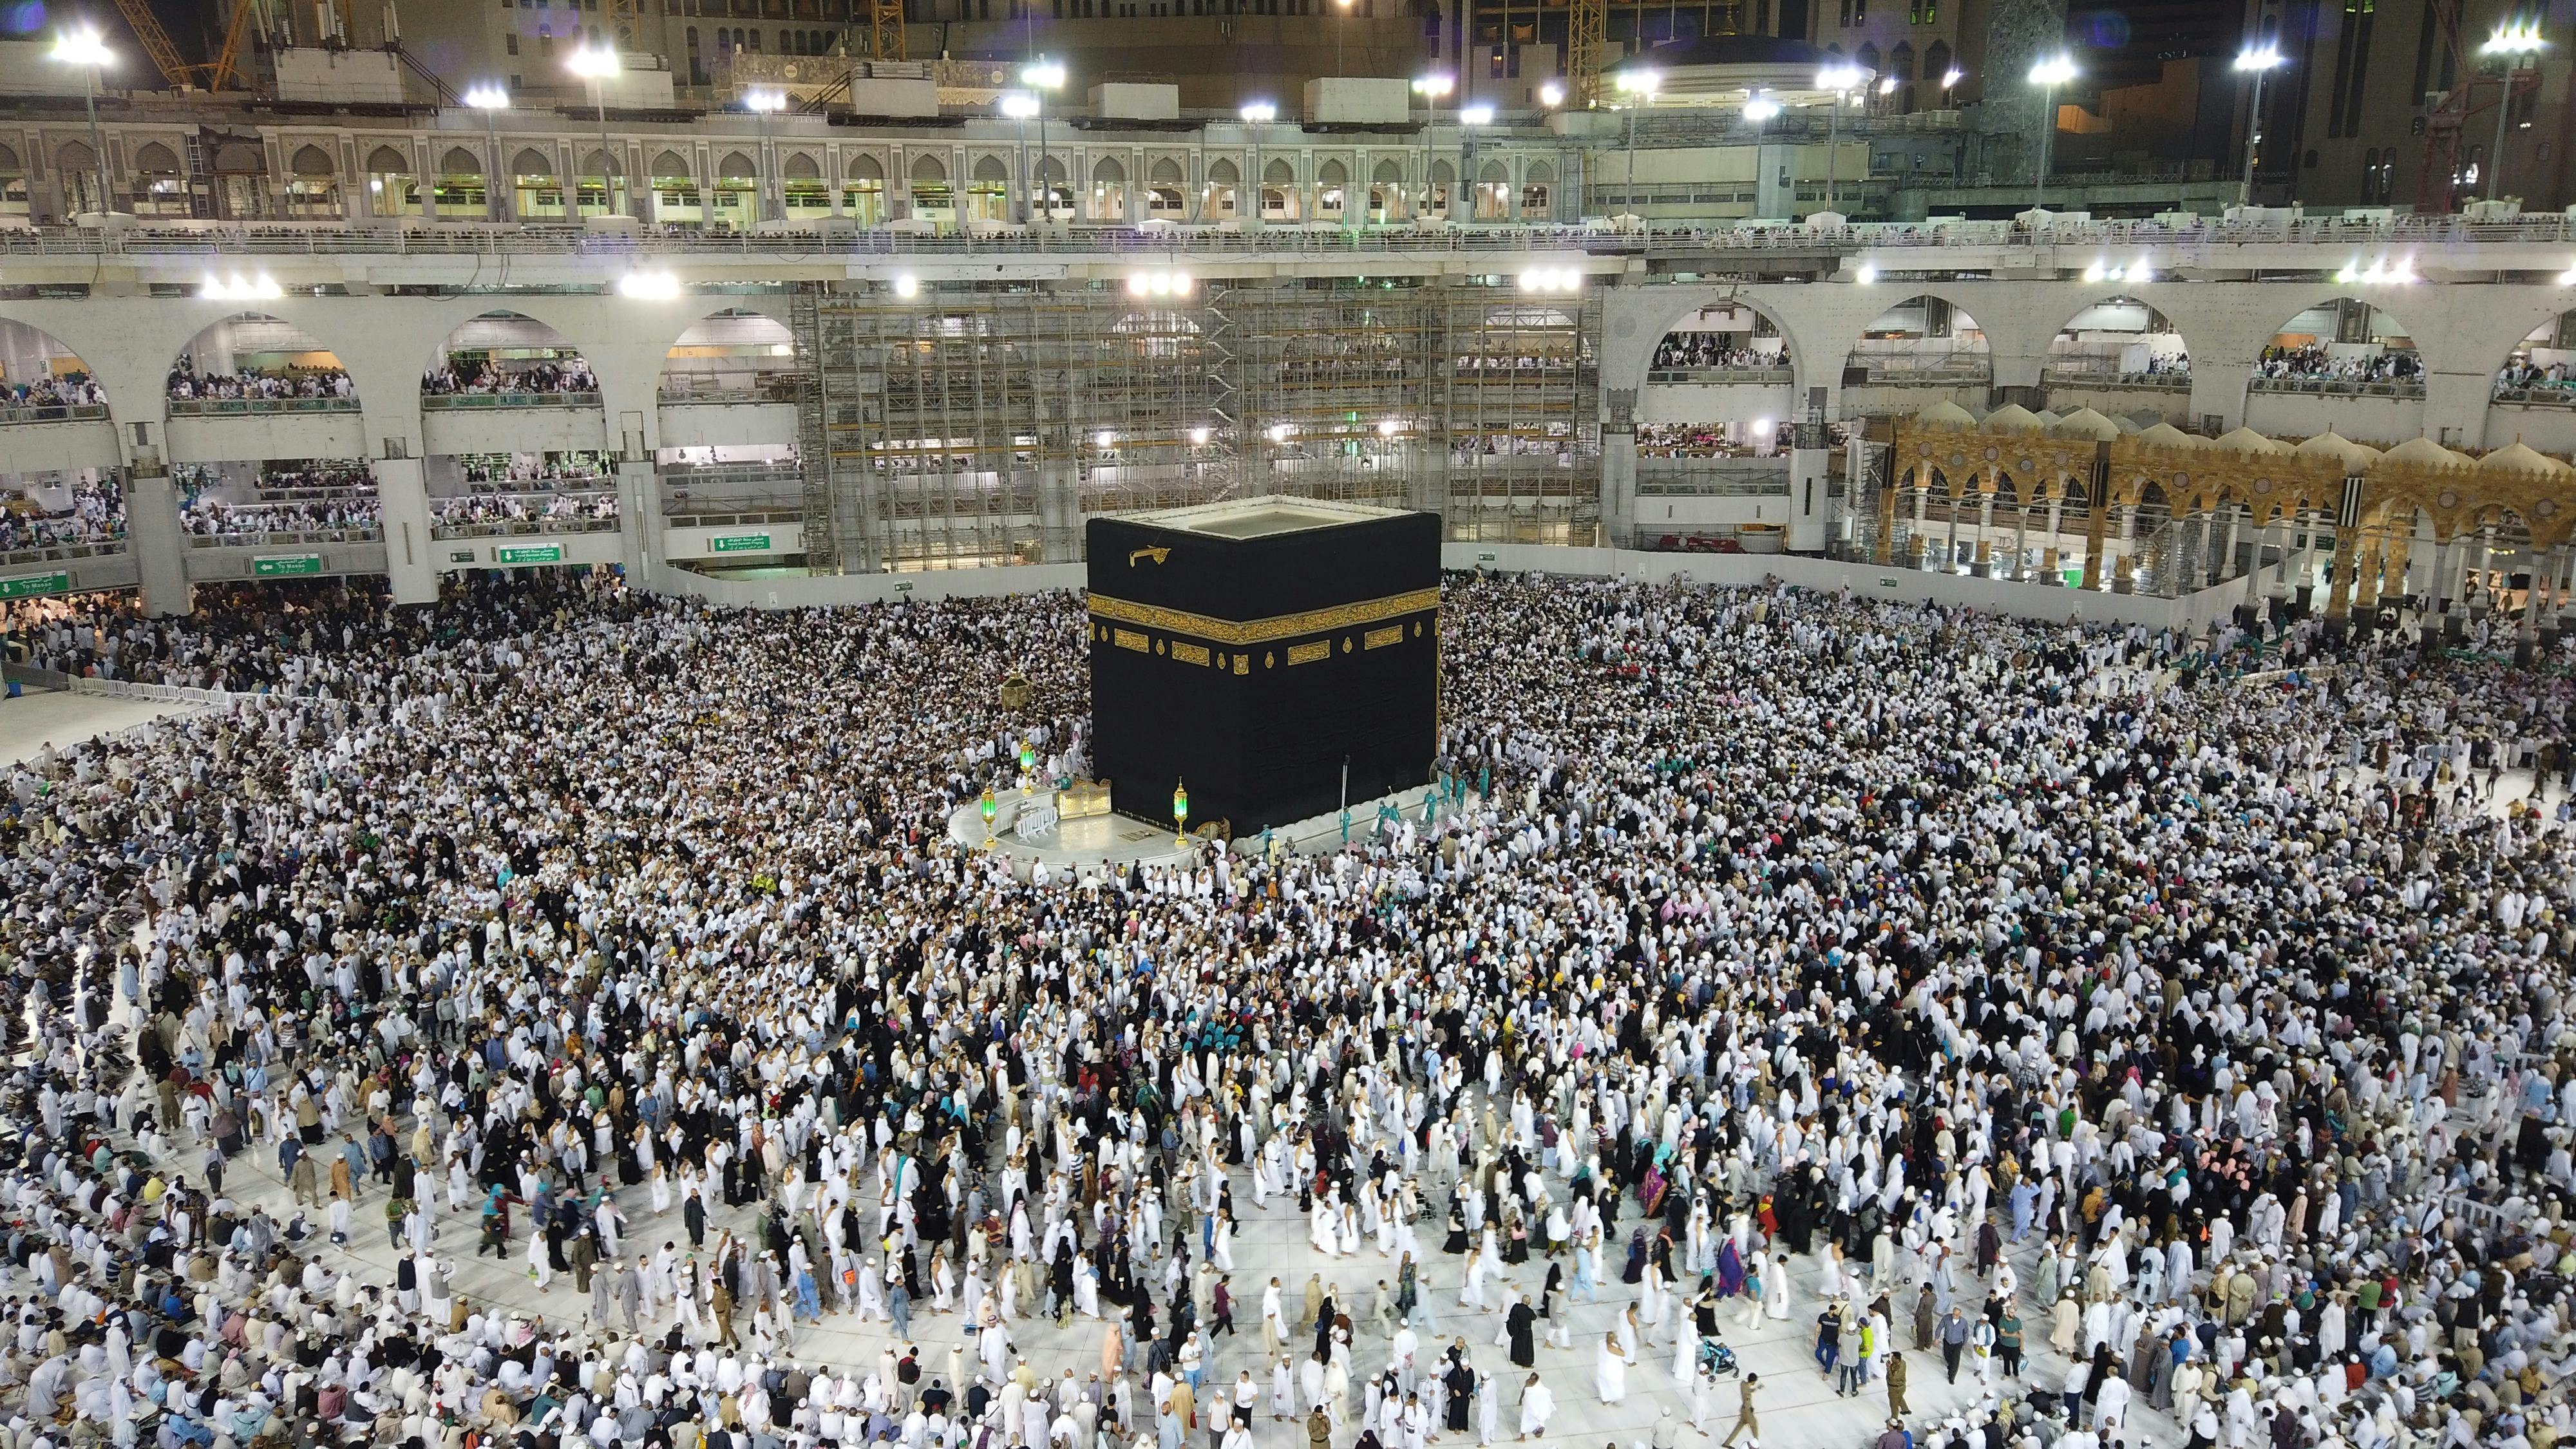 The Holy Kaabah